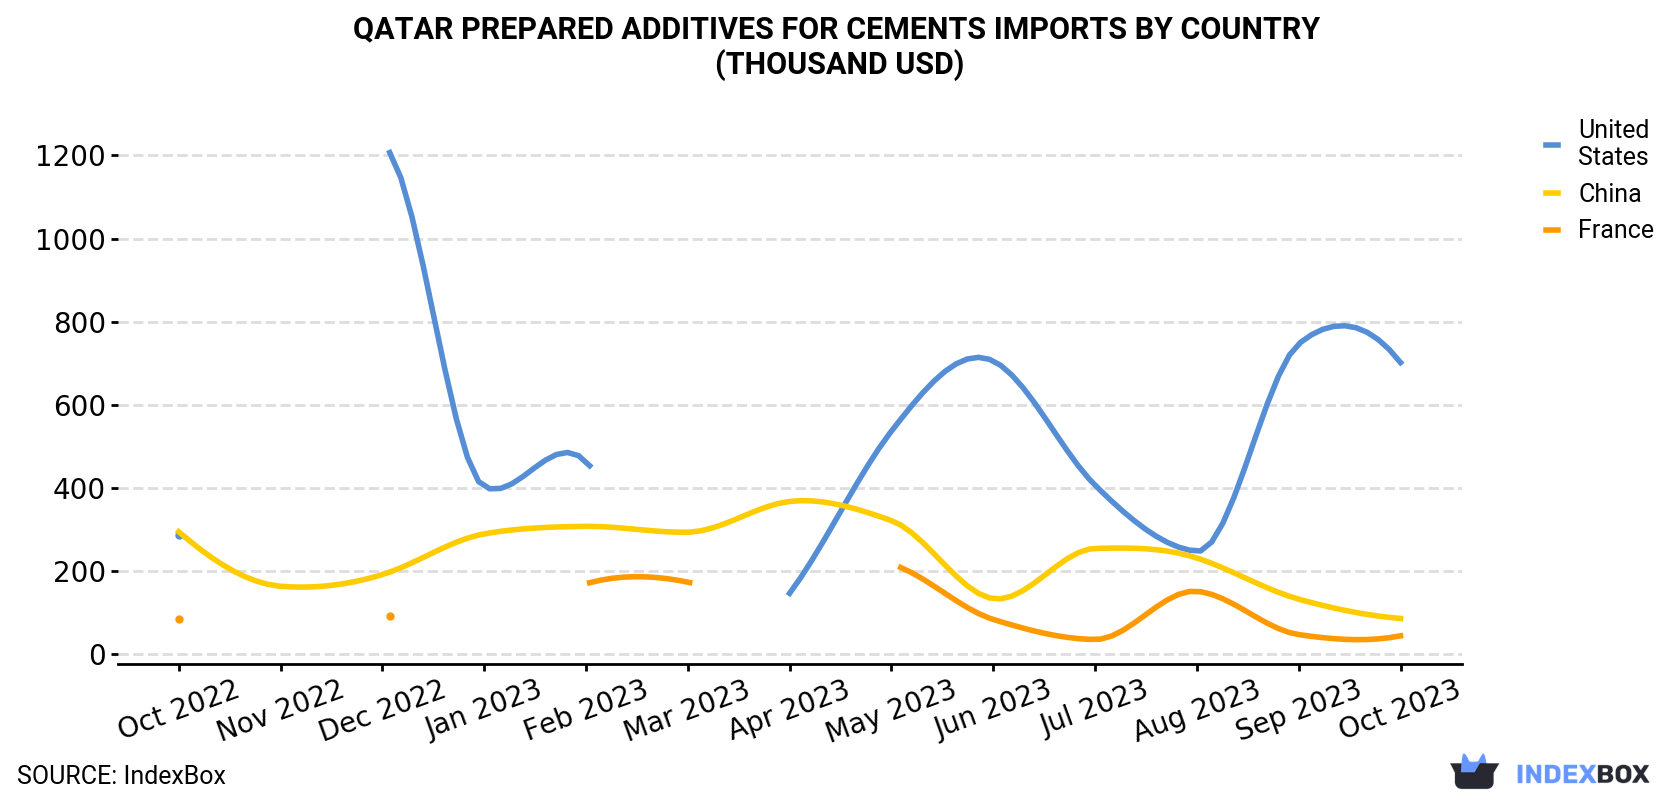 Qatar Prepared Additives For Cements Imports By Country (Thousand USD)